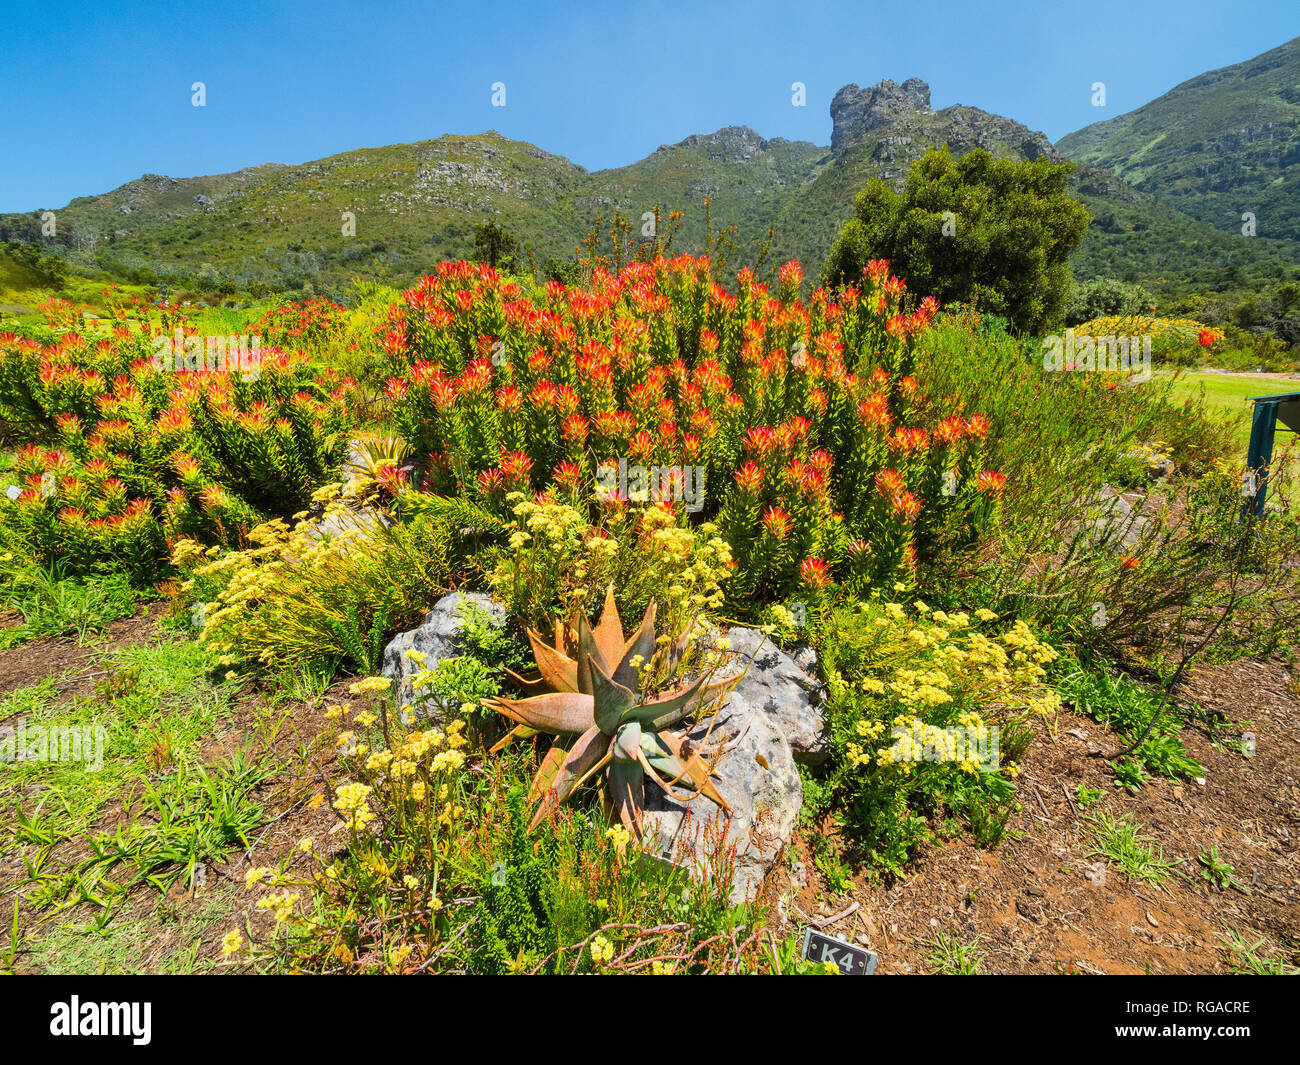 Red Protea in Kirstenbosch, Cape Town against the backdrop of Table mountain, South Africa. Pincushion flower in Kirstenbosch Botanic Gardens, Cape To Stock Photo